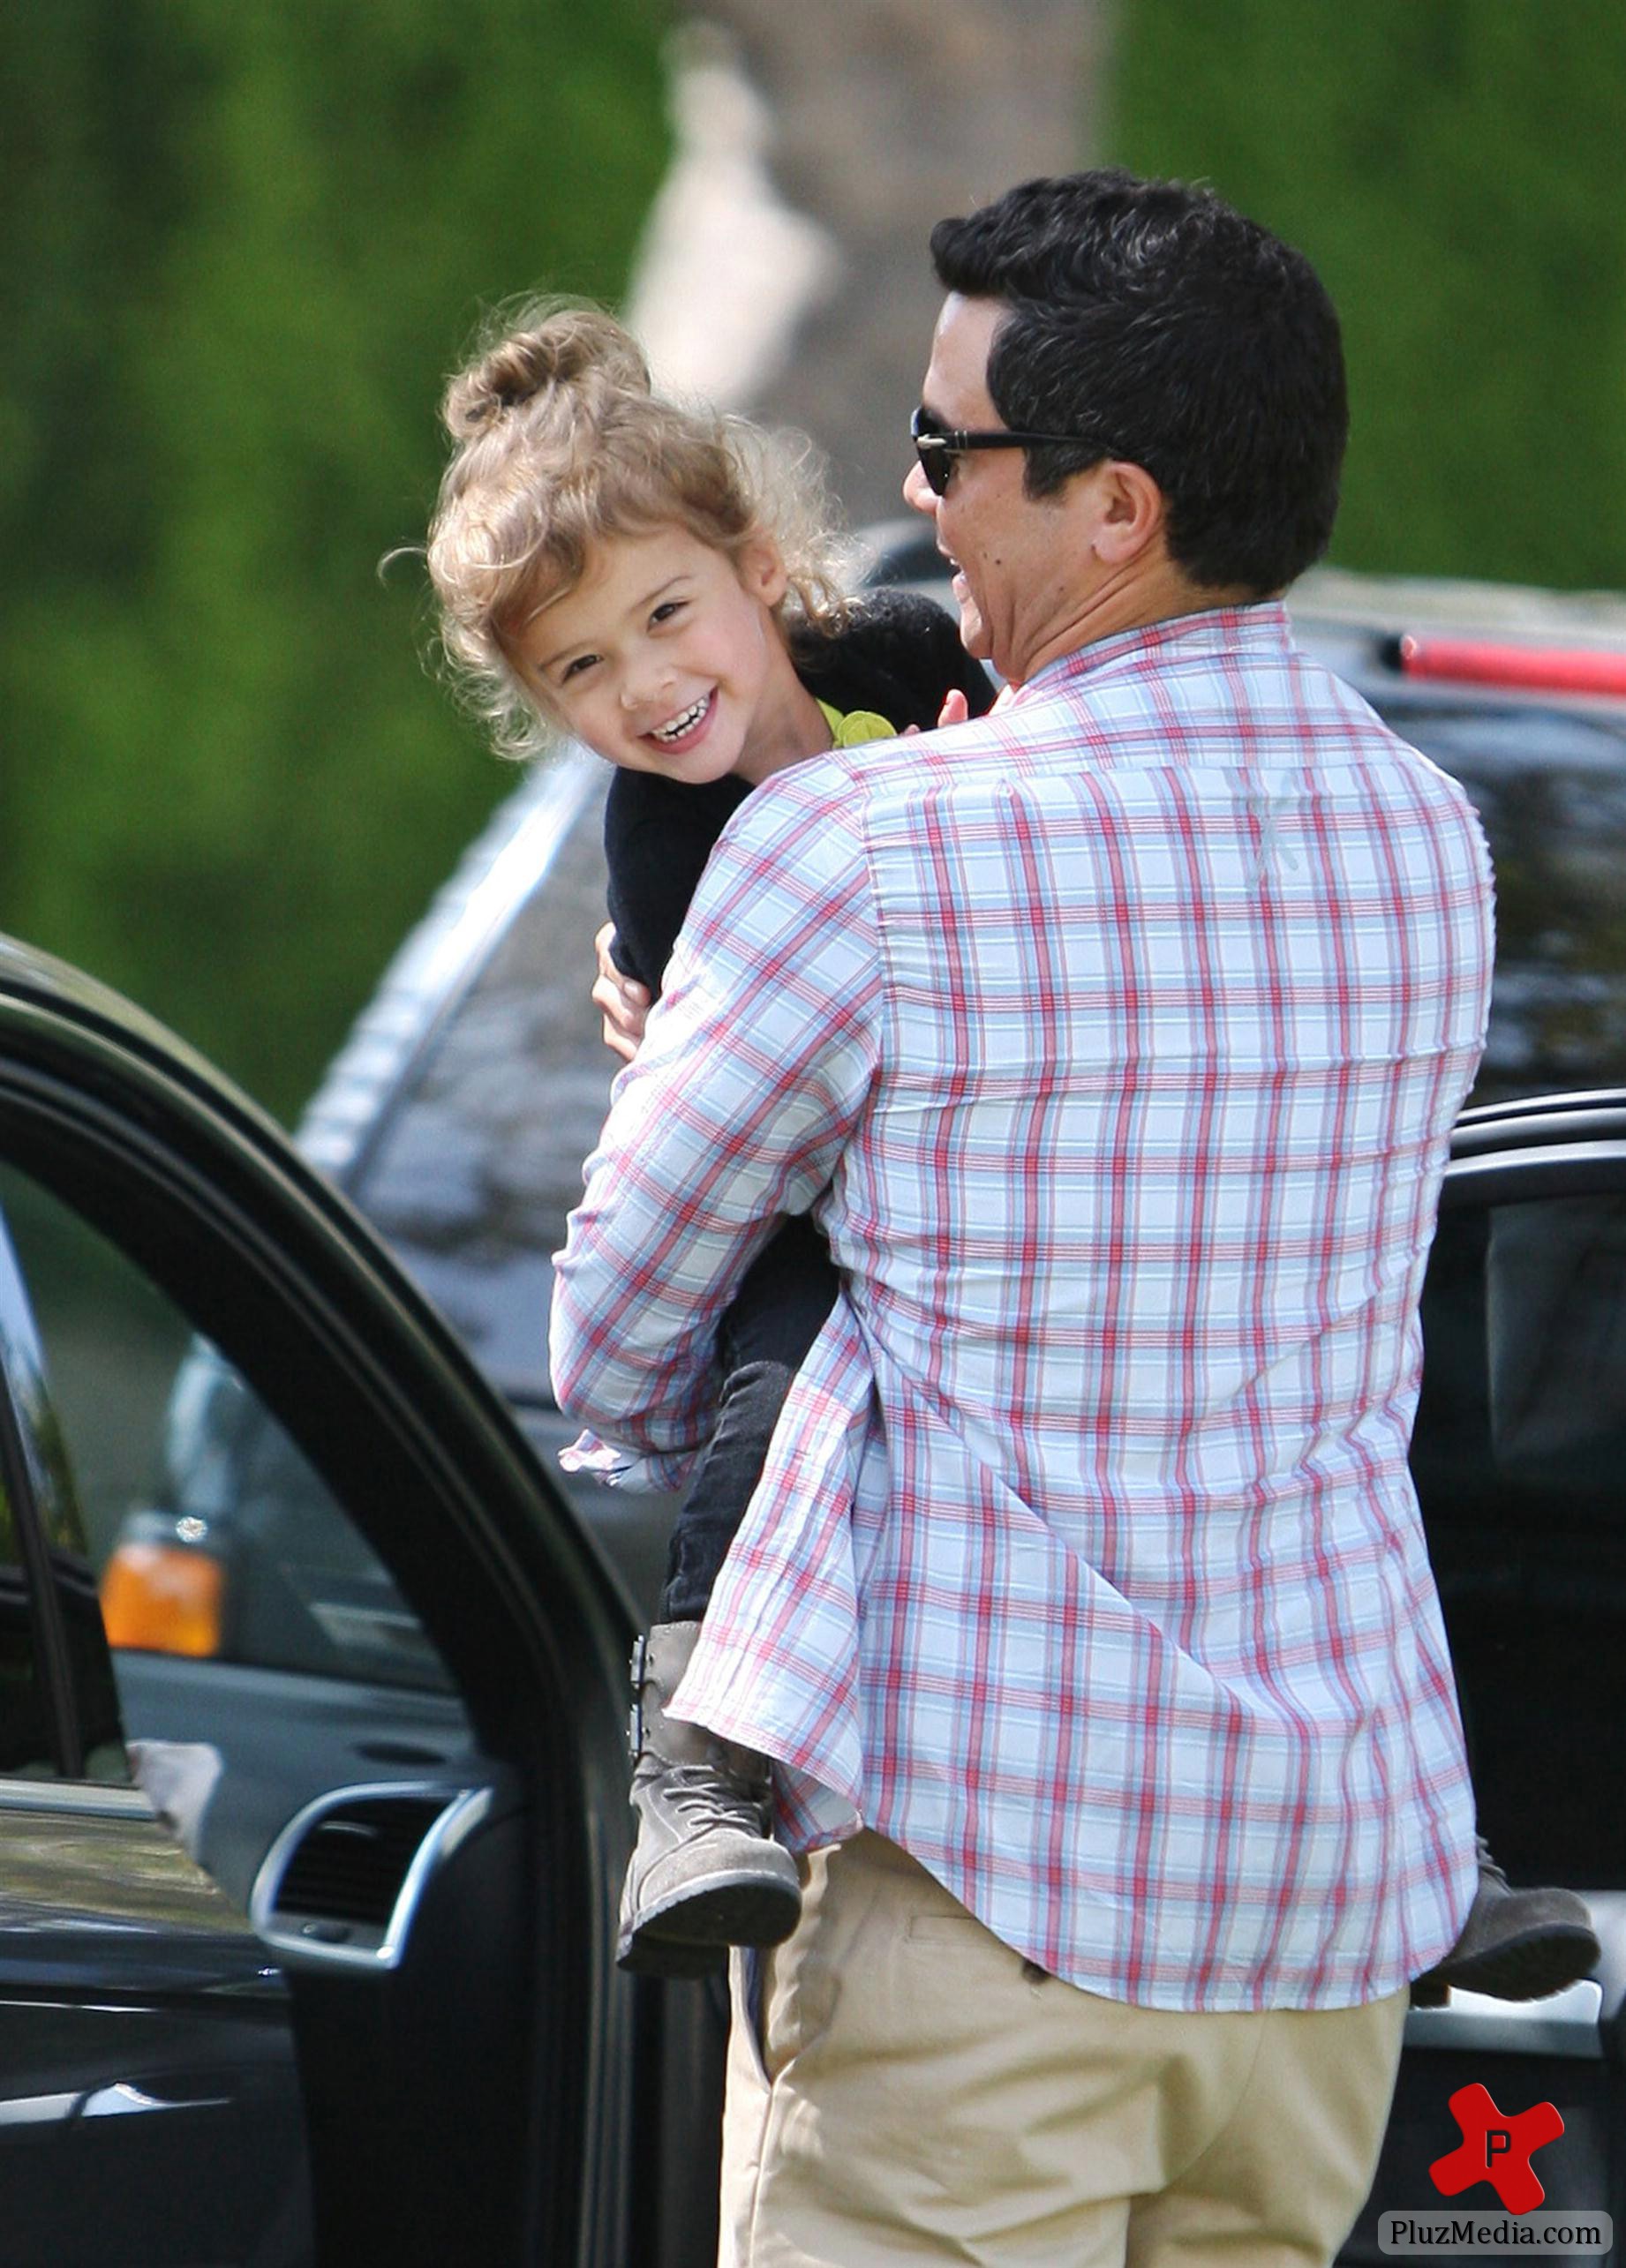 Jessica Alba, Cash Warren and daughter head out for a family meal photos | Picture 79848